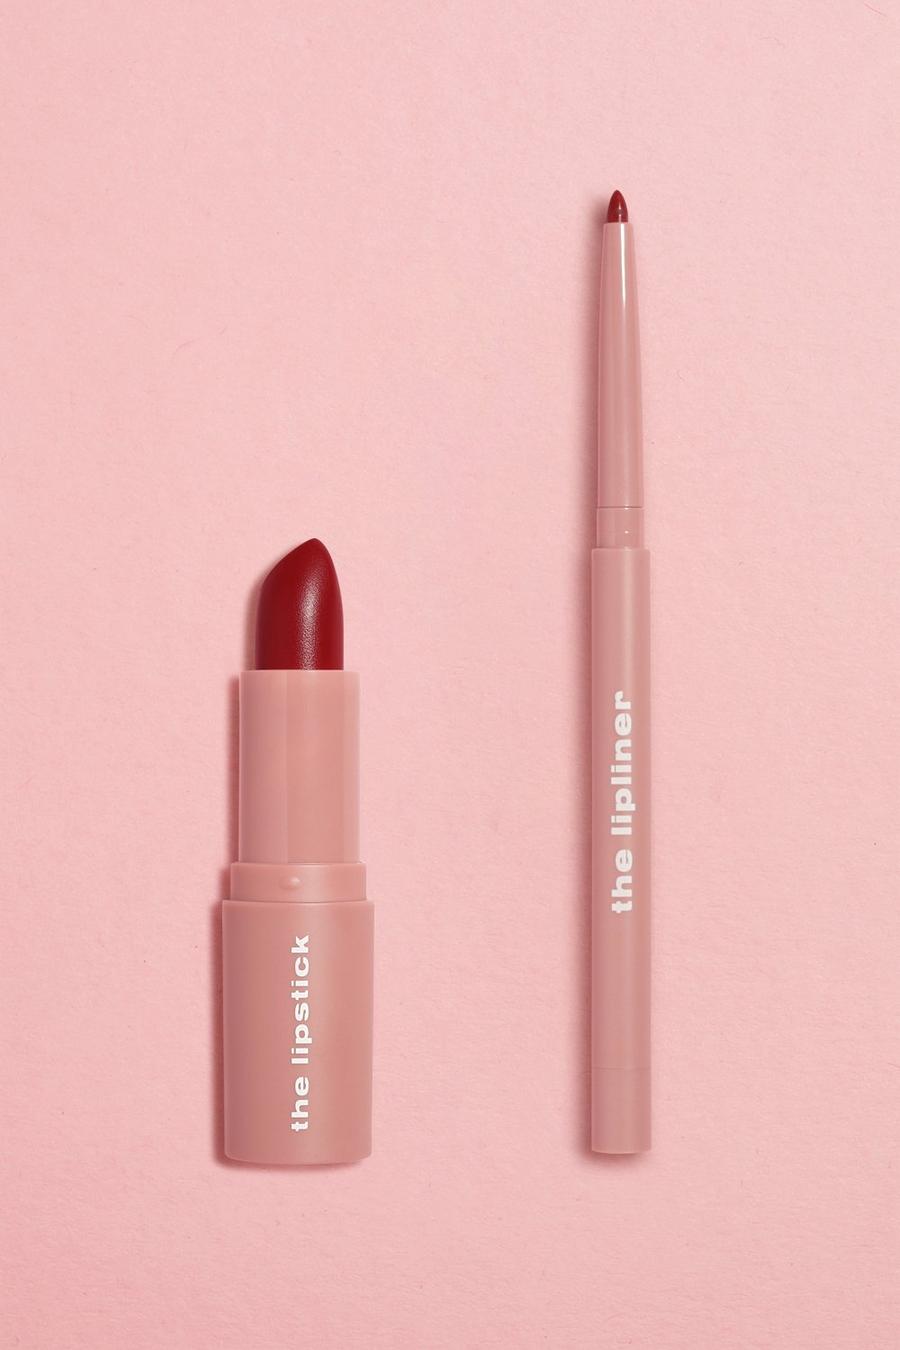 Boohoo Beauty Klassisches Lippenset - Rot, Red image number 1